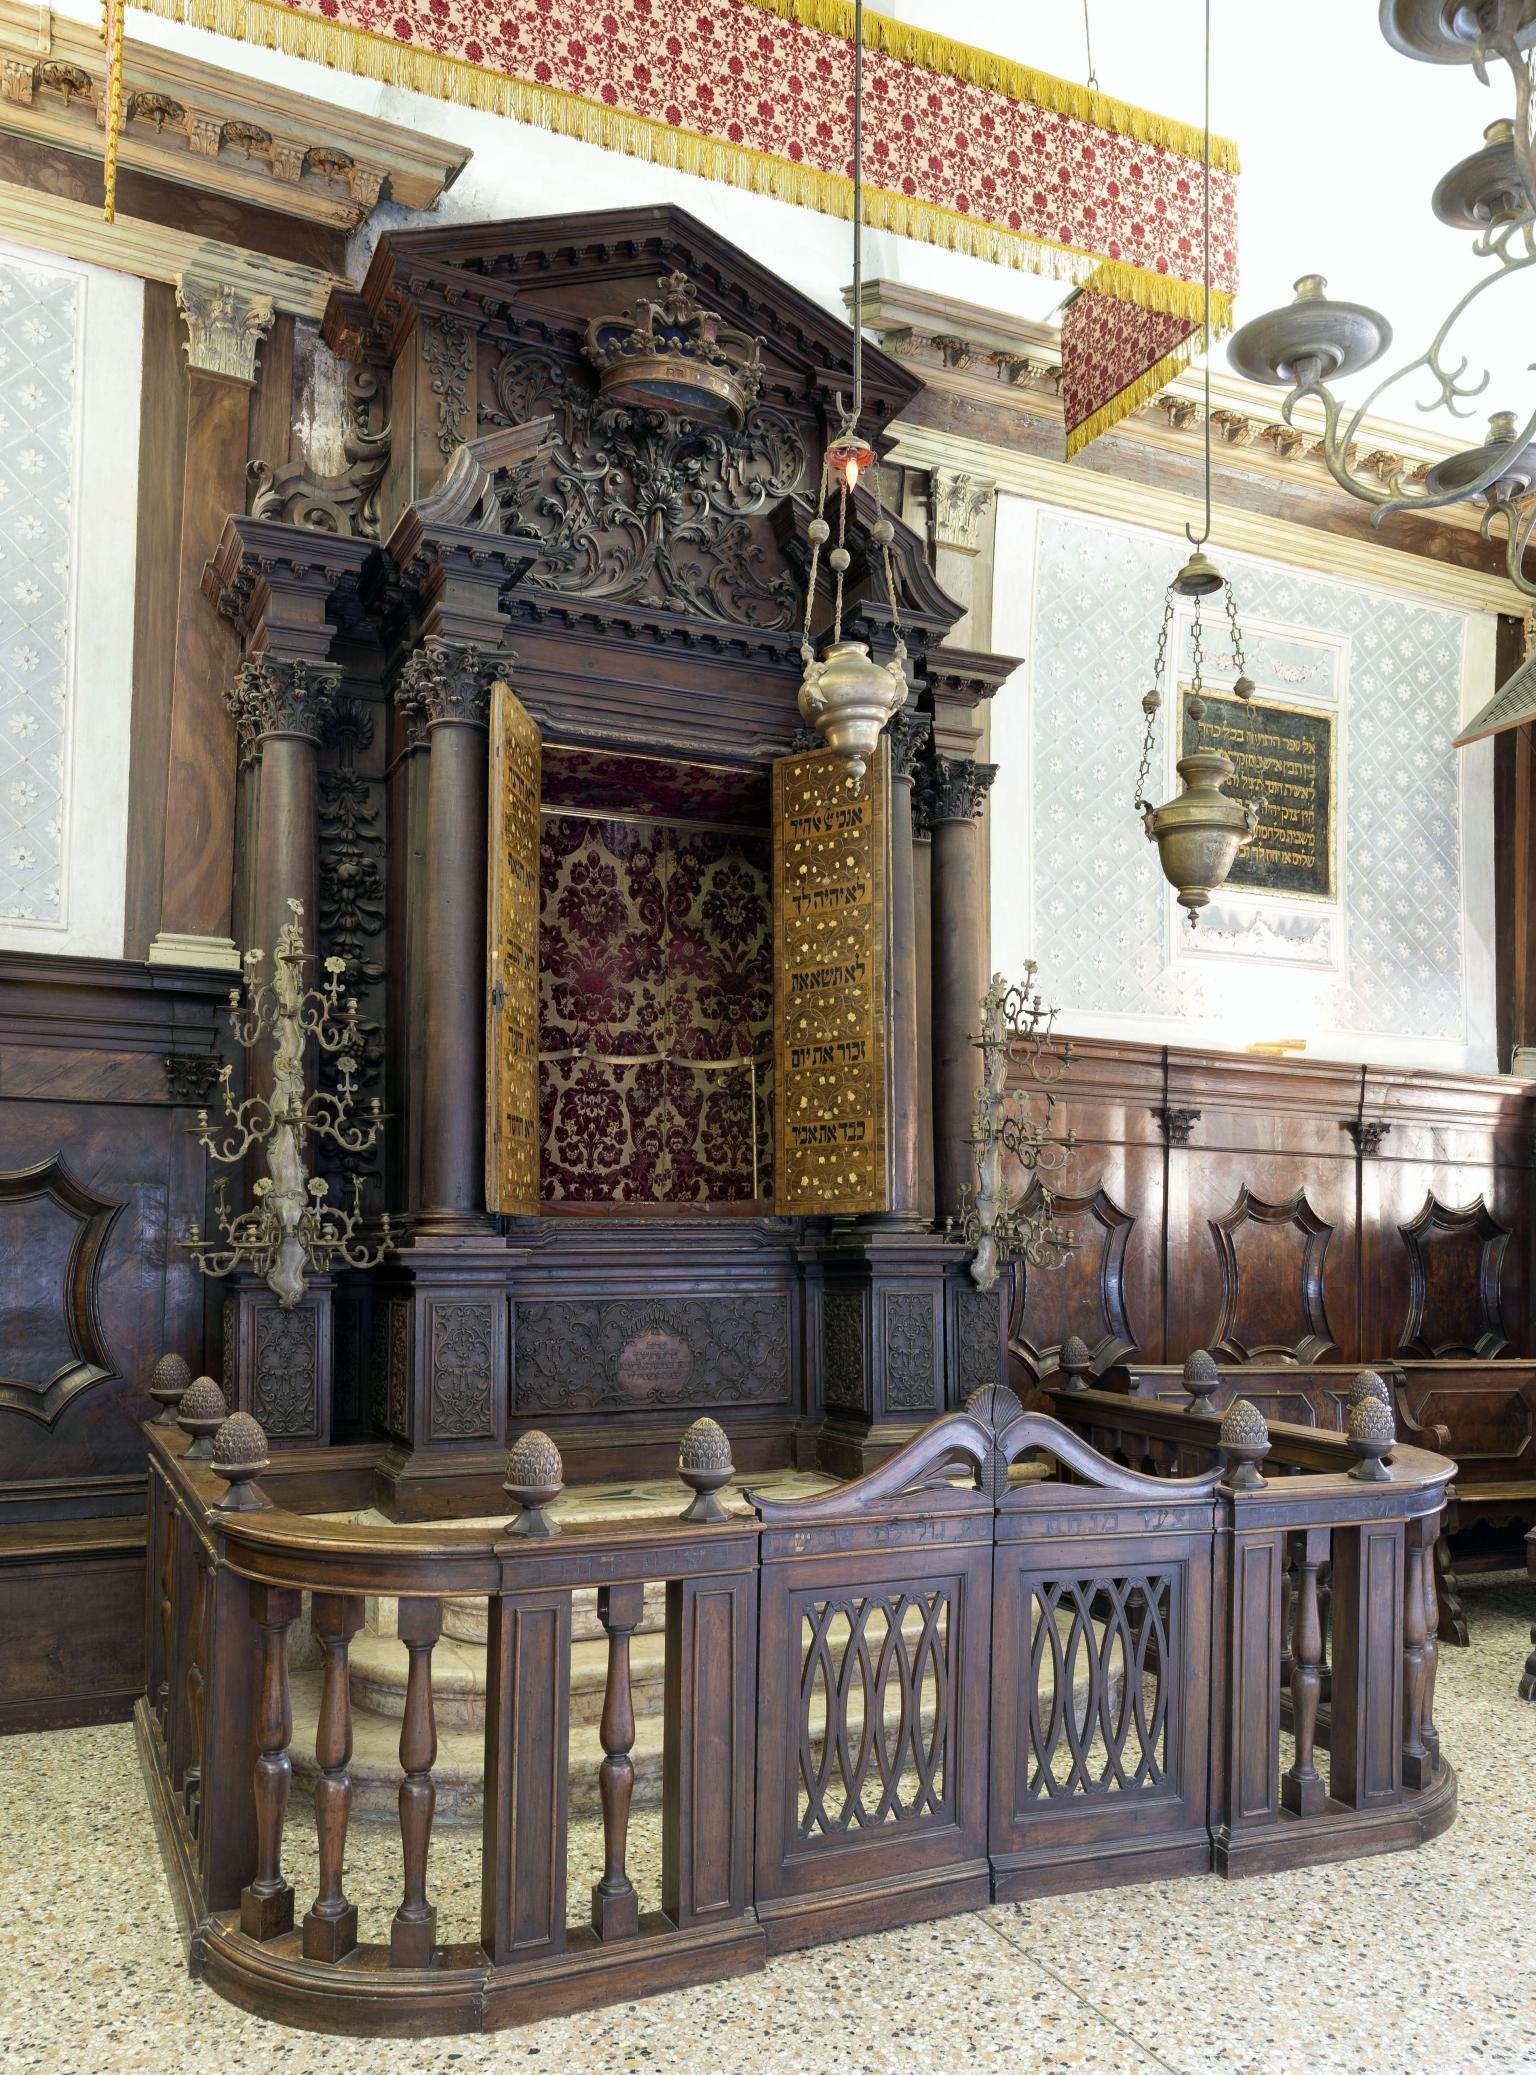 Photograph of carved Torah ark with gold doors, crown at top, and wooden fence around it.